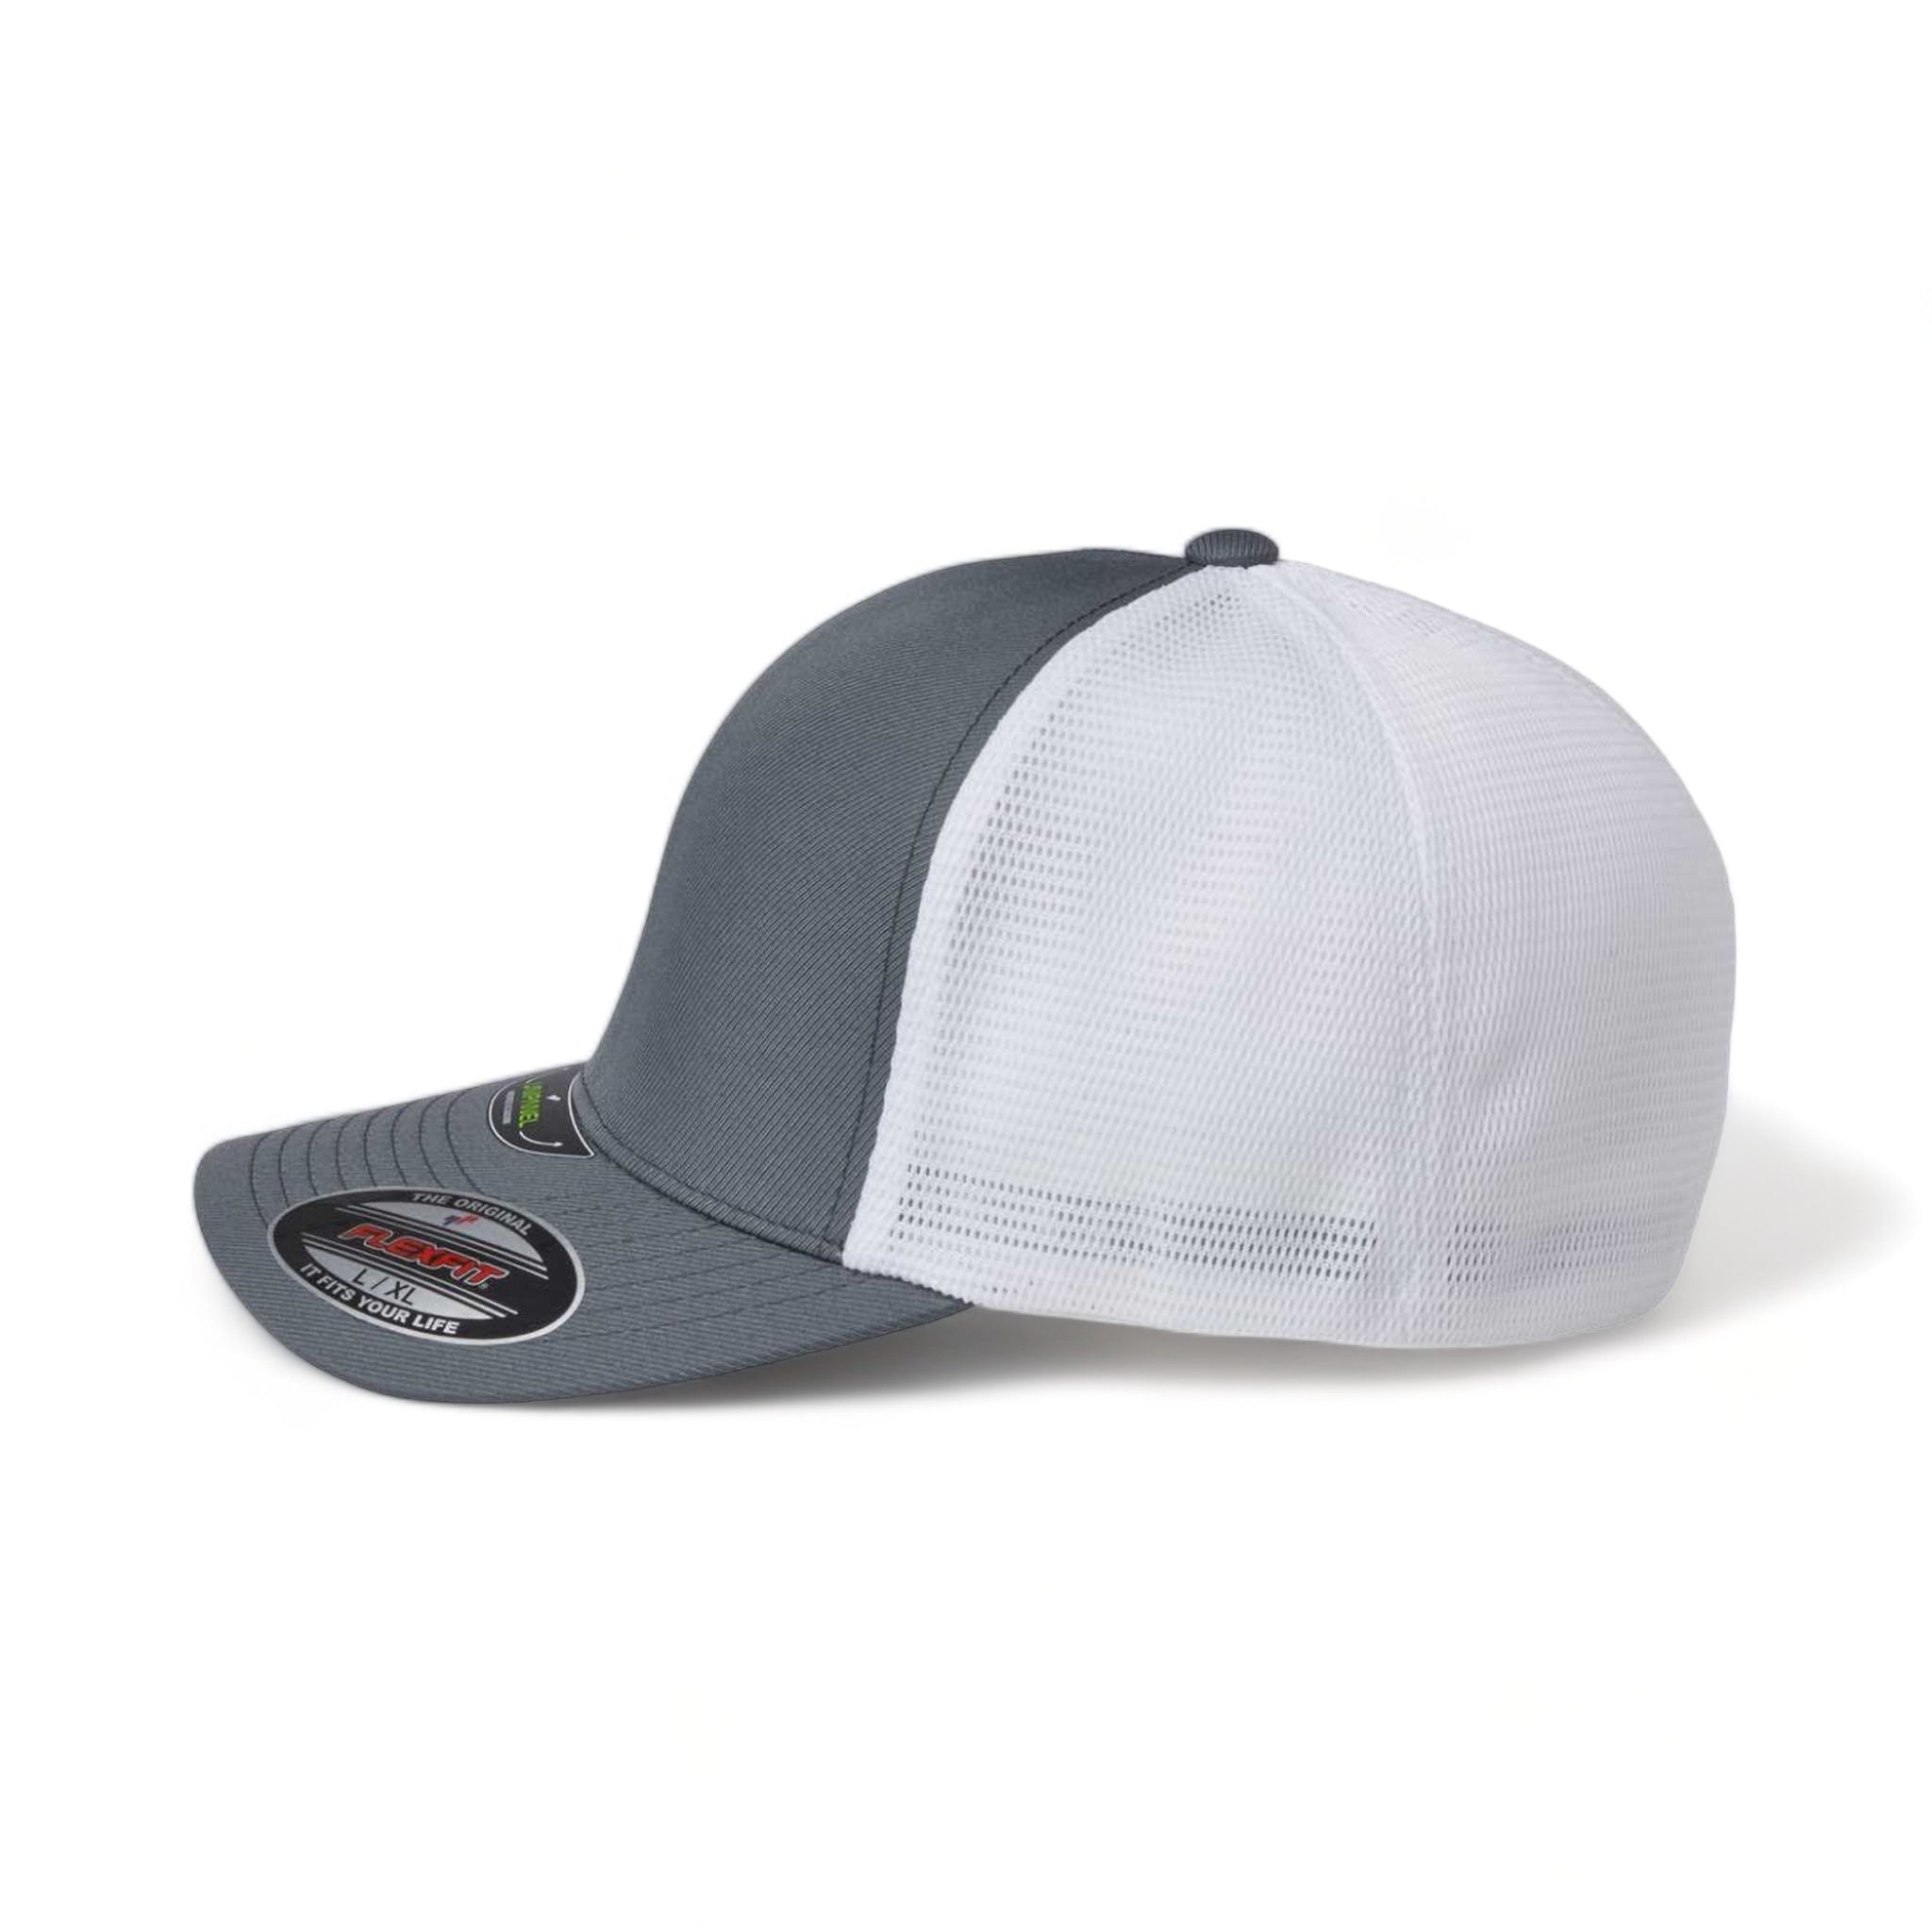 Side view of Flexfit 5511UP custom hat in charcoal and white